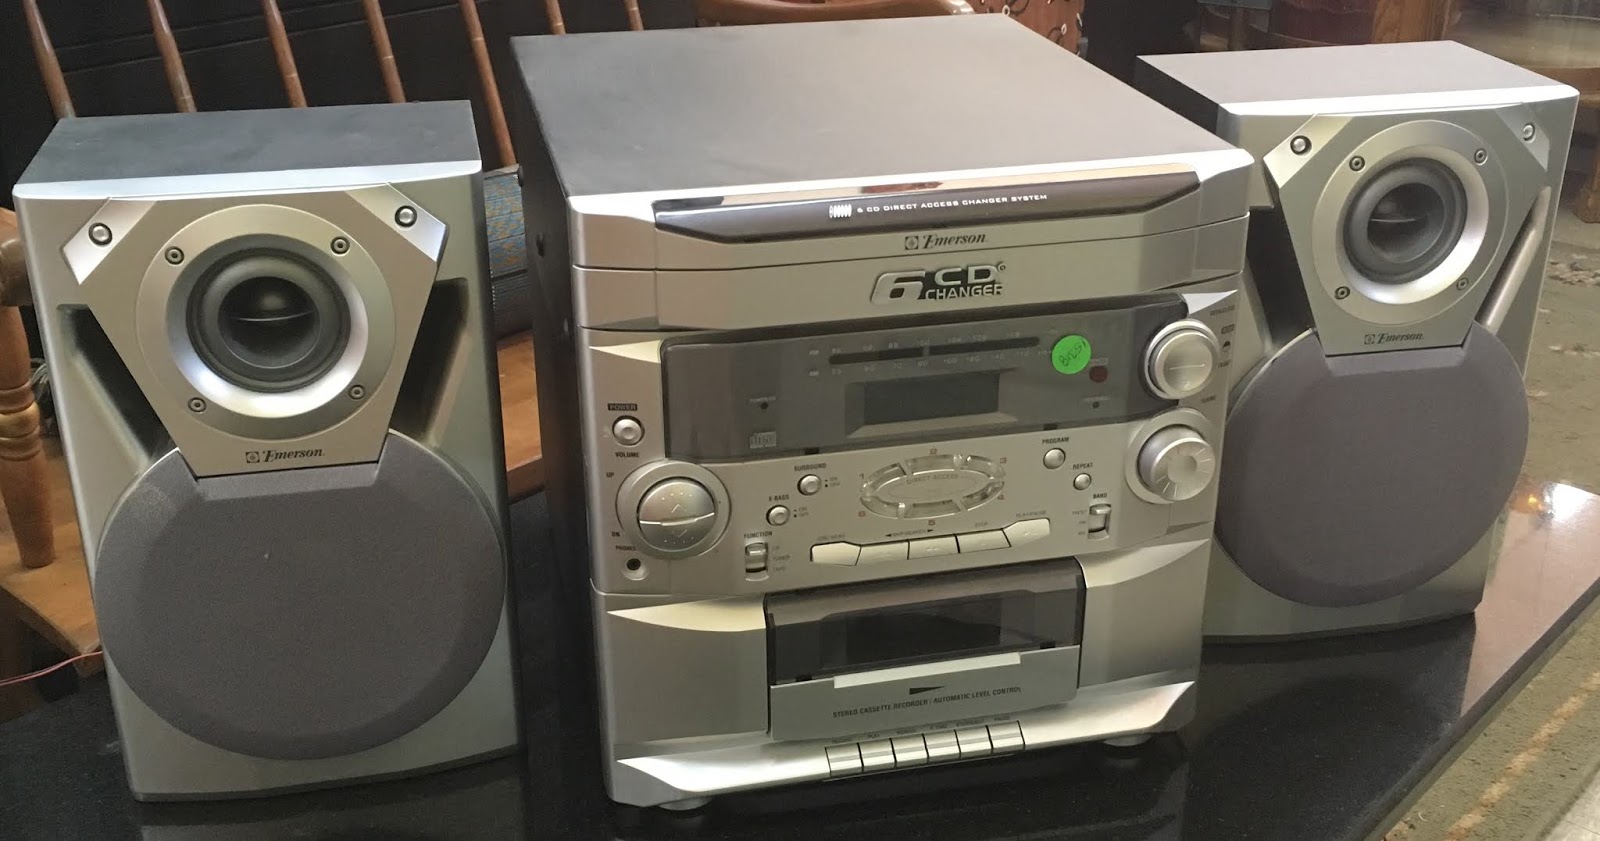 Uhuru Furniture & Collectibles: Emerson Stereo System - $55 SOLD